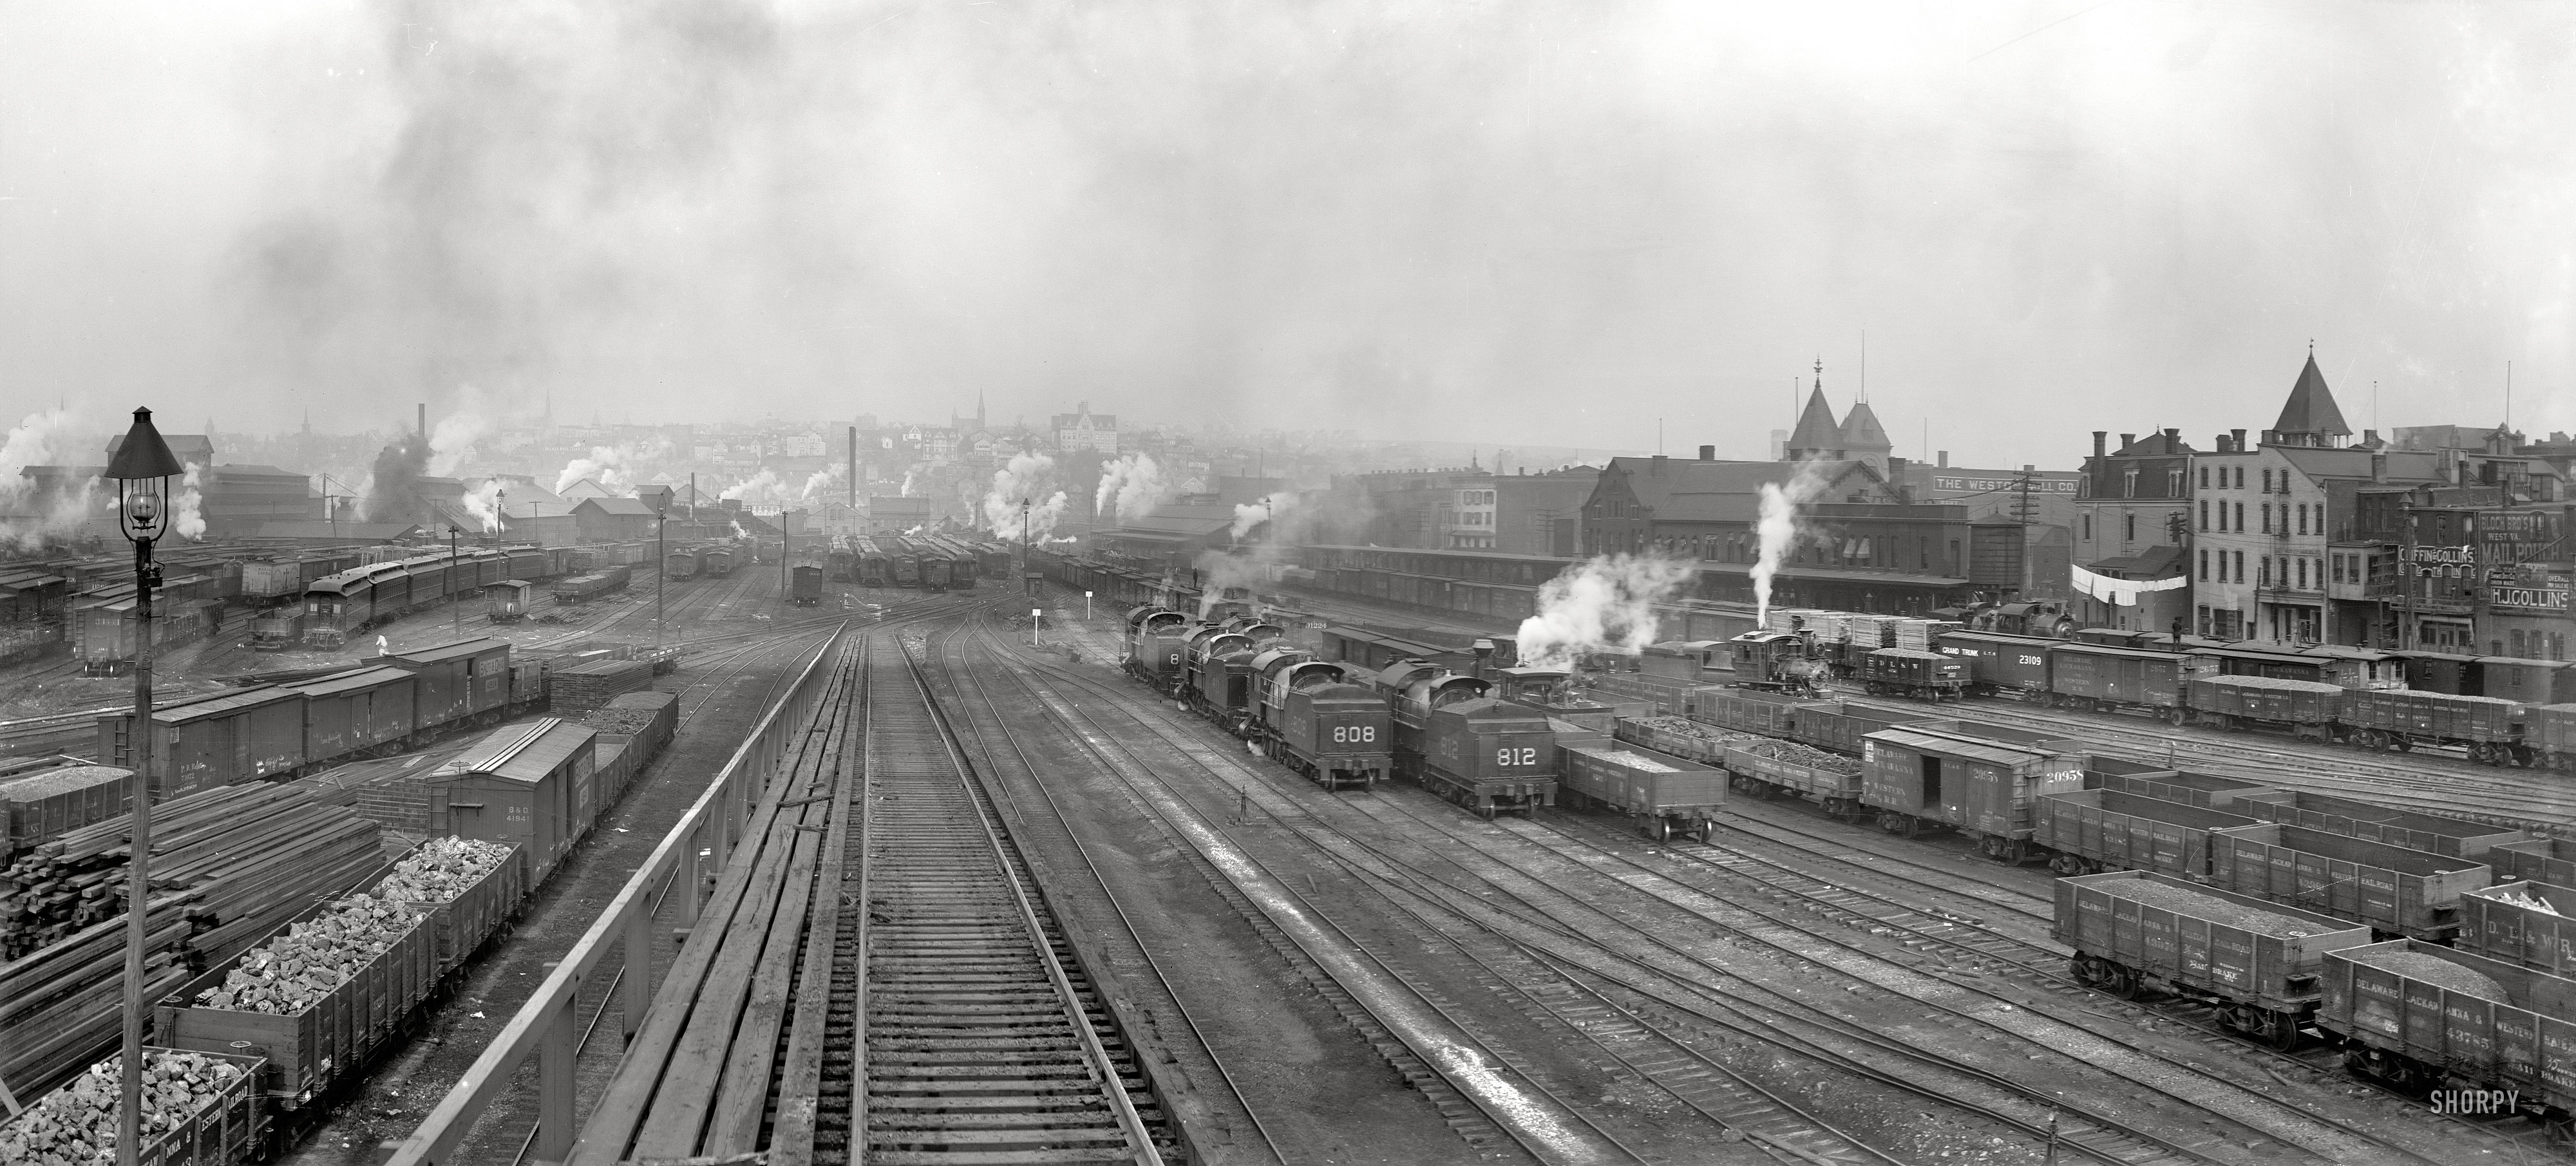 Scranton, Pennsylvania, circa 1900. "Delaware, Lackawanna, and Western Railroad yards." Panorama of two 8x10 inch glass negatives. We've seen the left half of this view before; the right side, with someone's laundry billowing bravely amid the the soot, is new. Detroit Publishing Company. View full size.